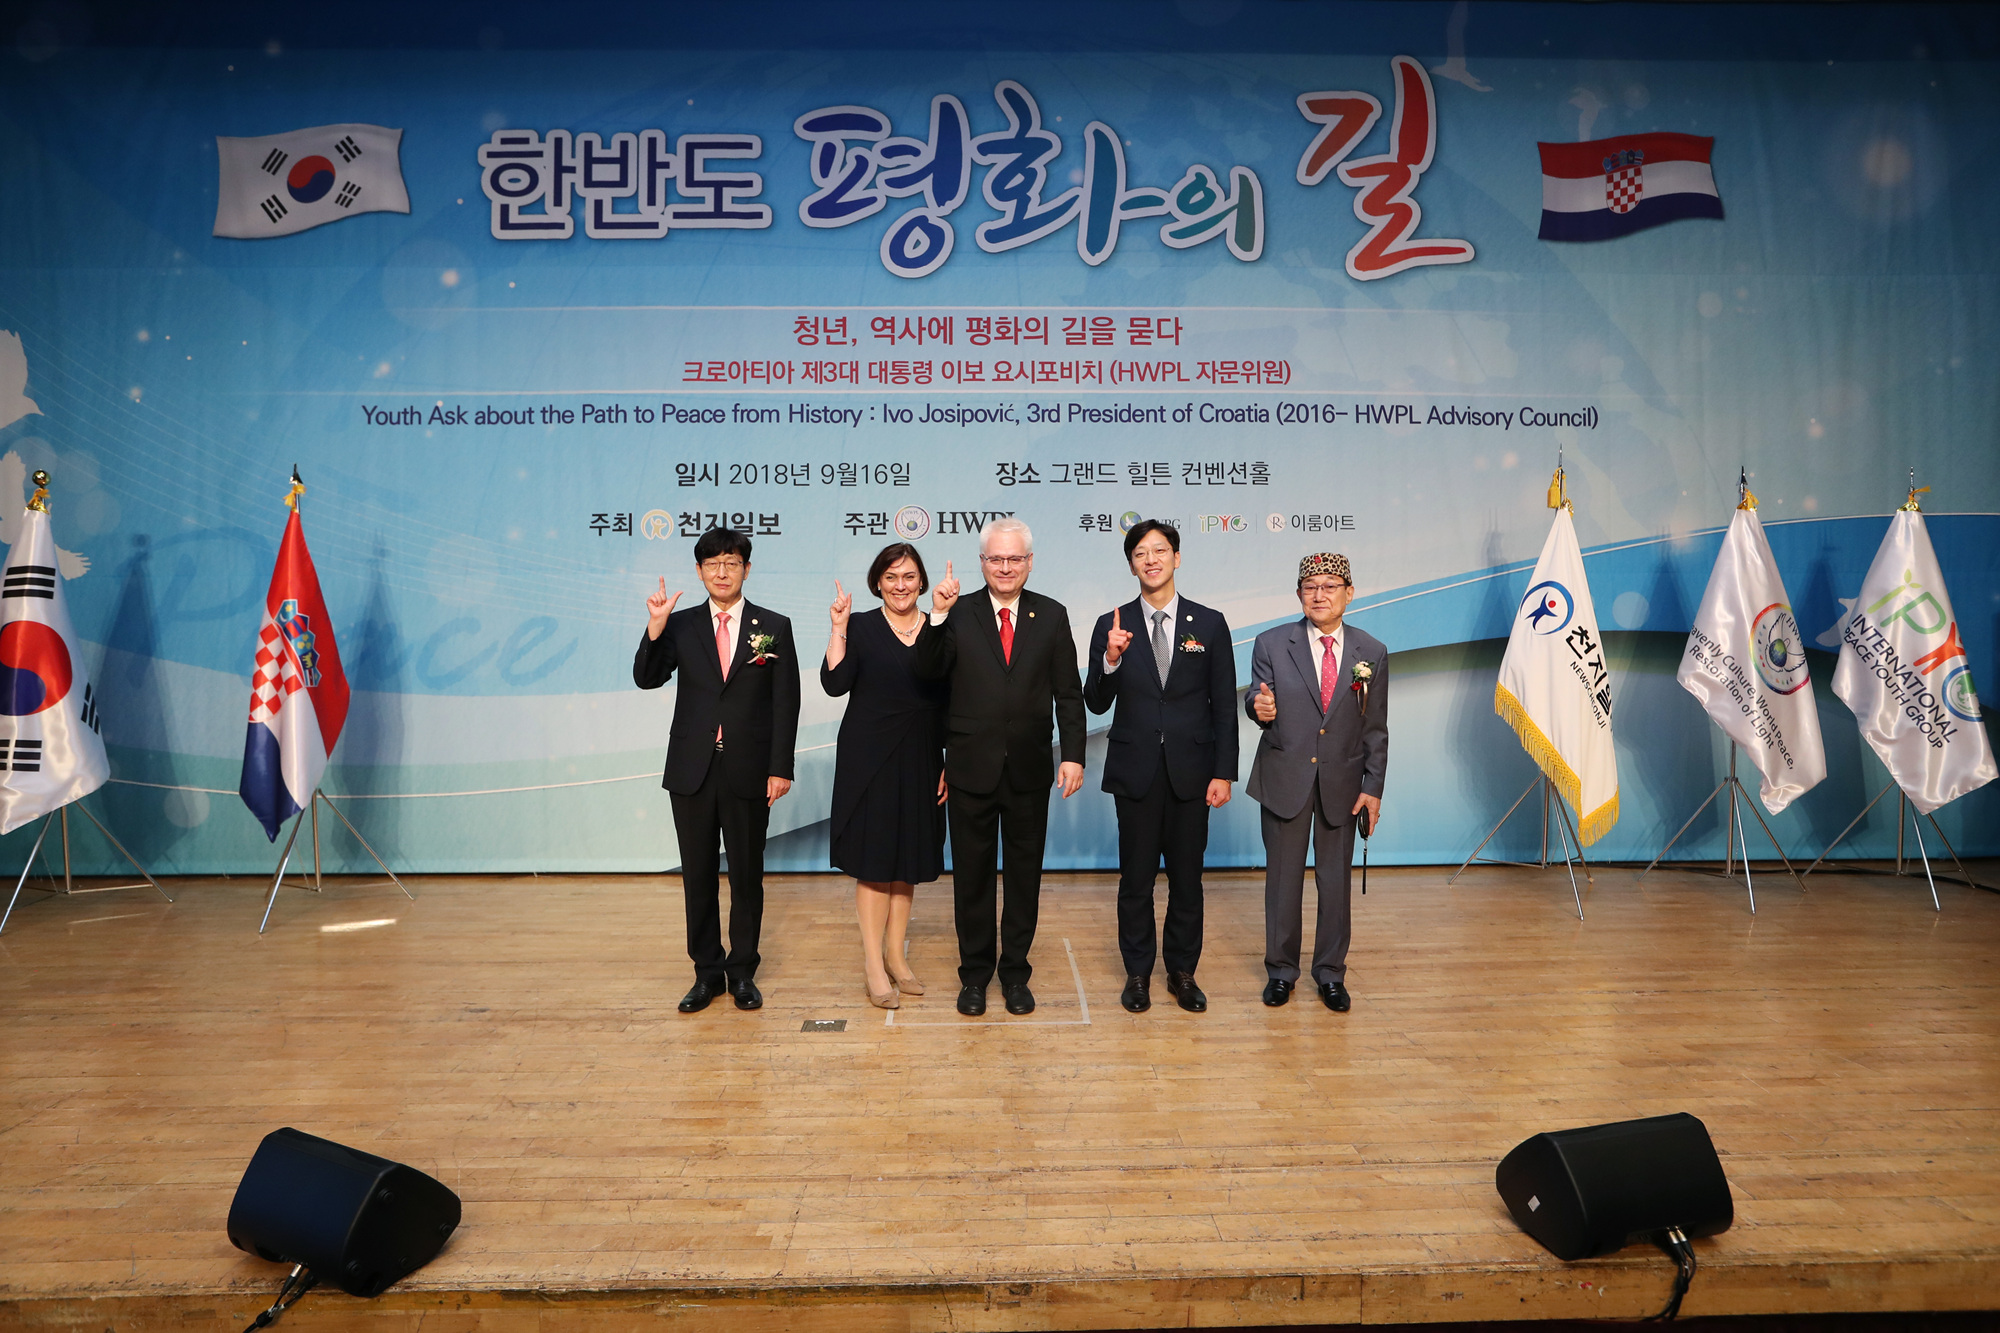 Former Presidents of Eastern Europe Held Peace Lectures Aspiring to the Peaceful Reunification of the Korean Peninsula and Global Peace